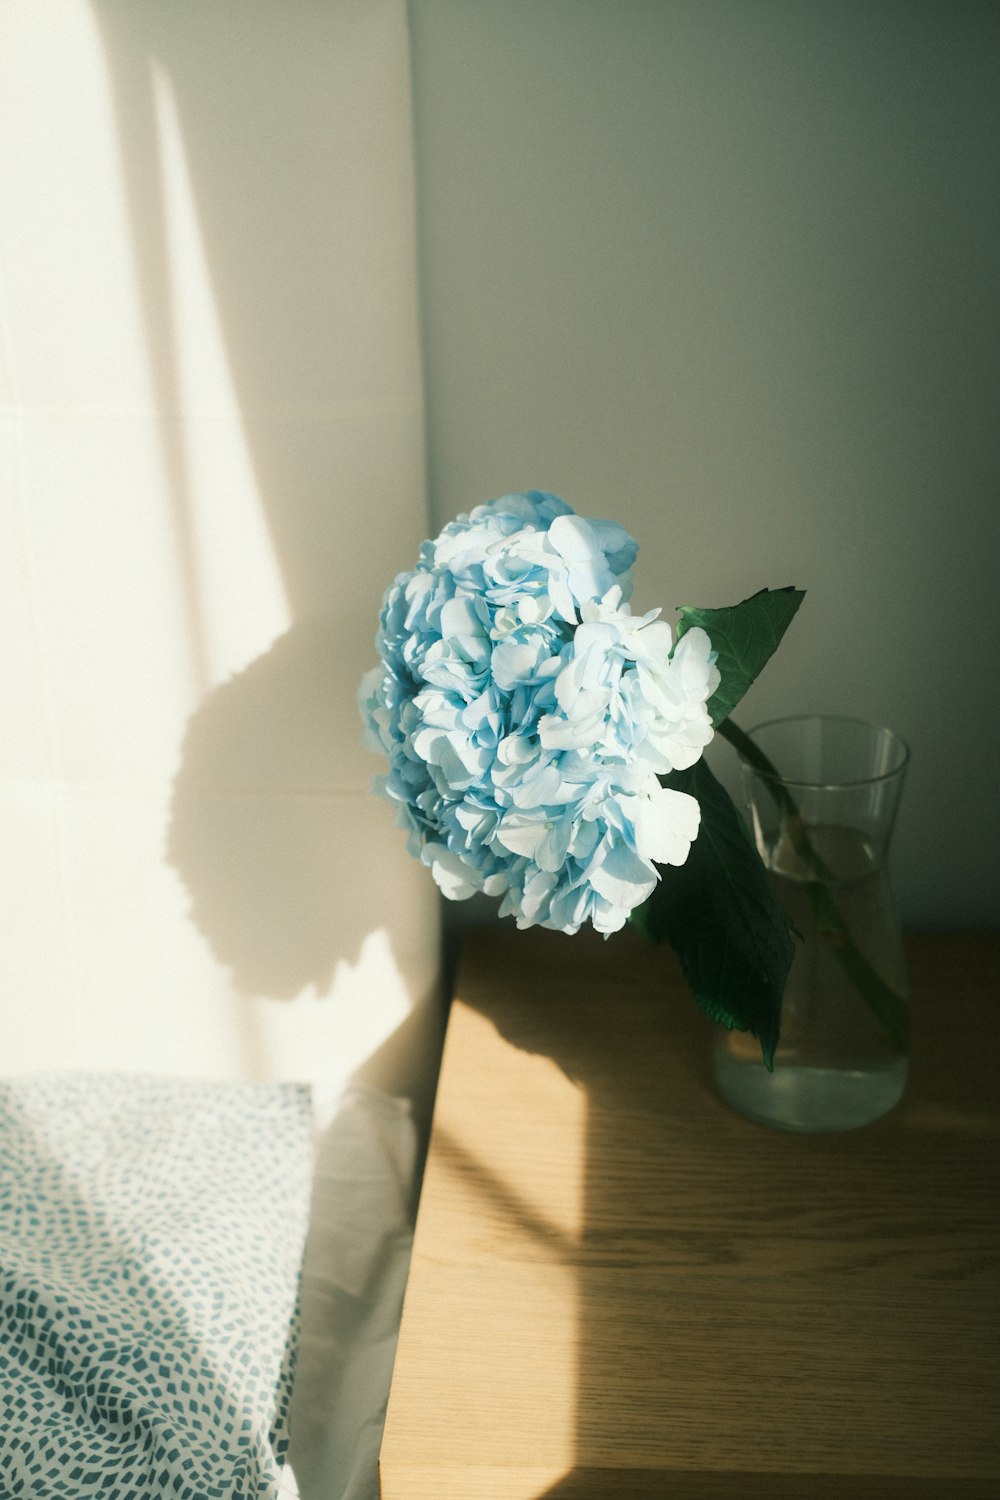 a blue flower in a glass vase on a table